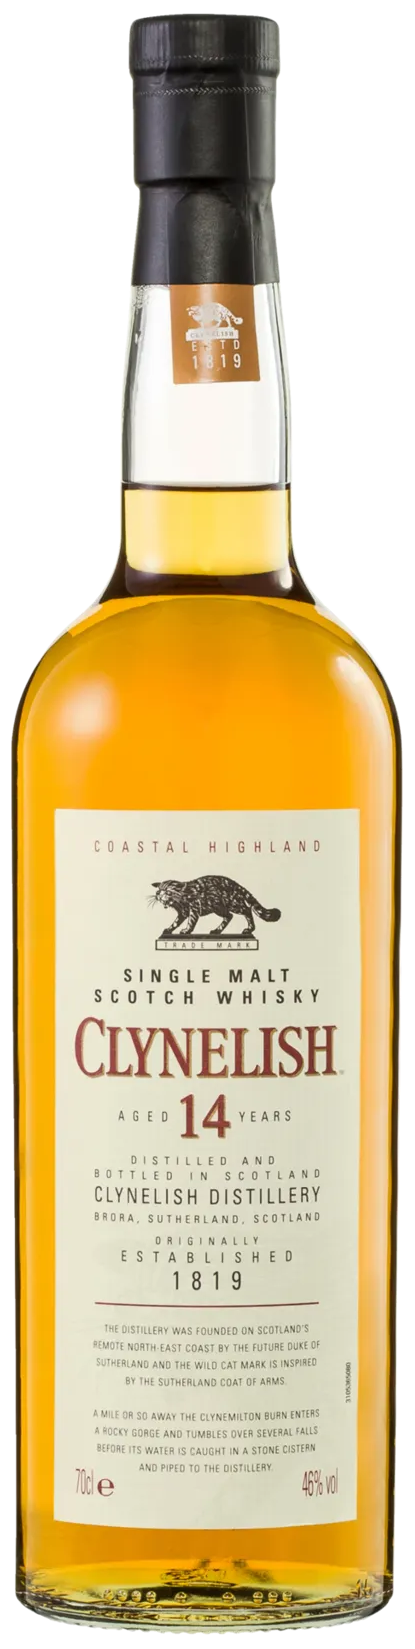 An image of a bottle of Clynelish 14 Year Old Single Malt Scotch Whisky 700ml